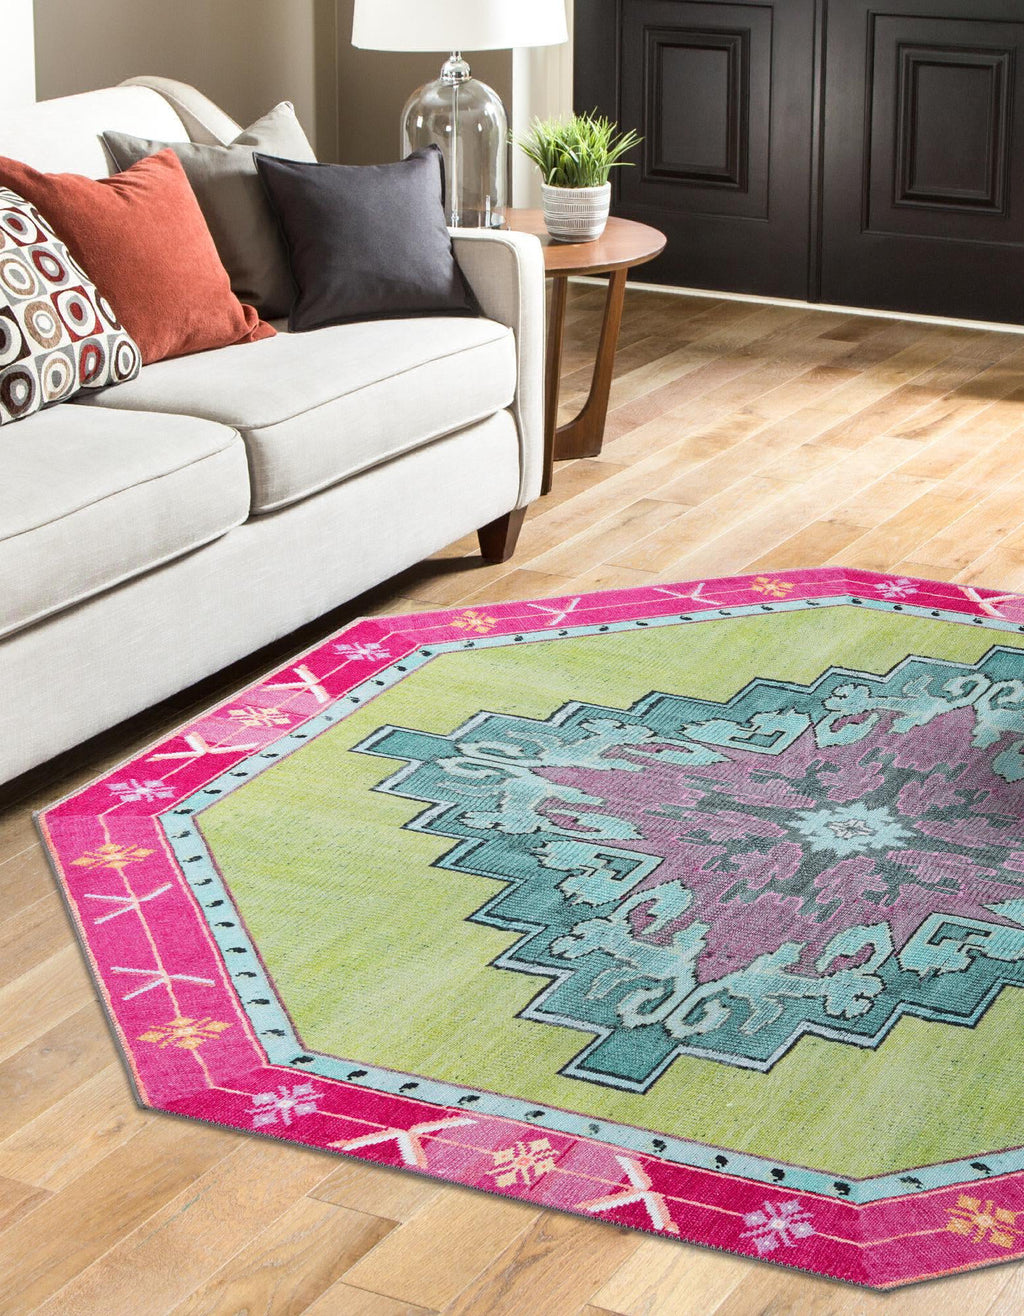 Unique Loom Timeless LEO-RVVL2 Green Area Rug Octagon Lifestyle Image Feature